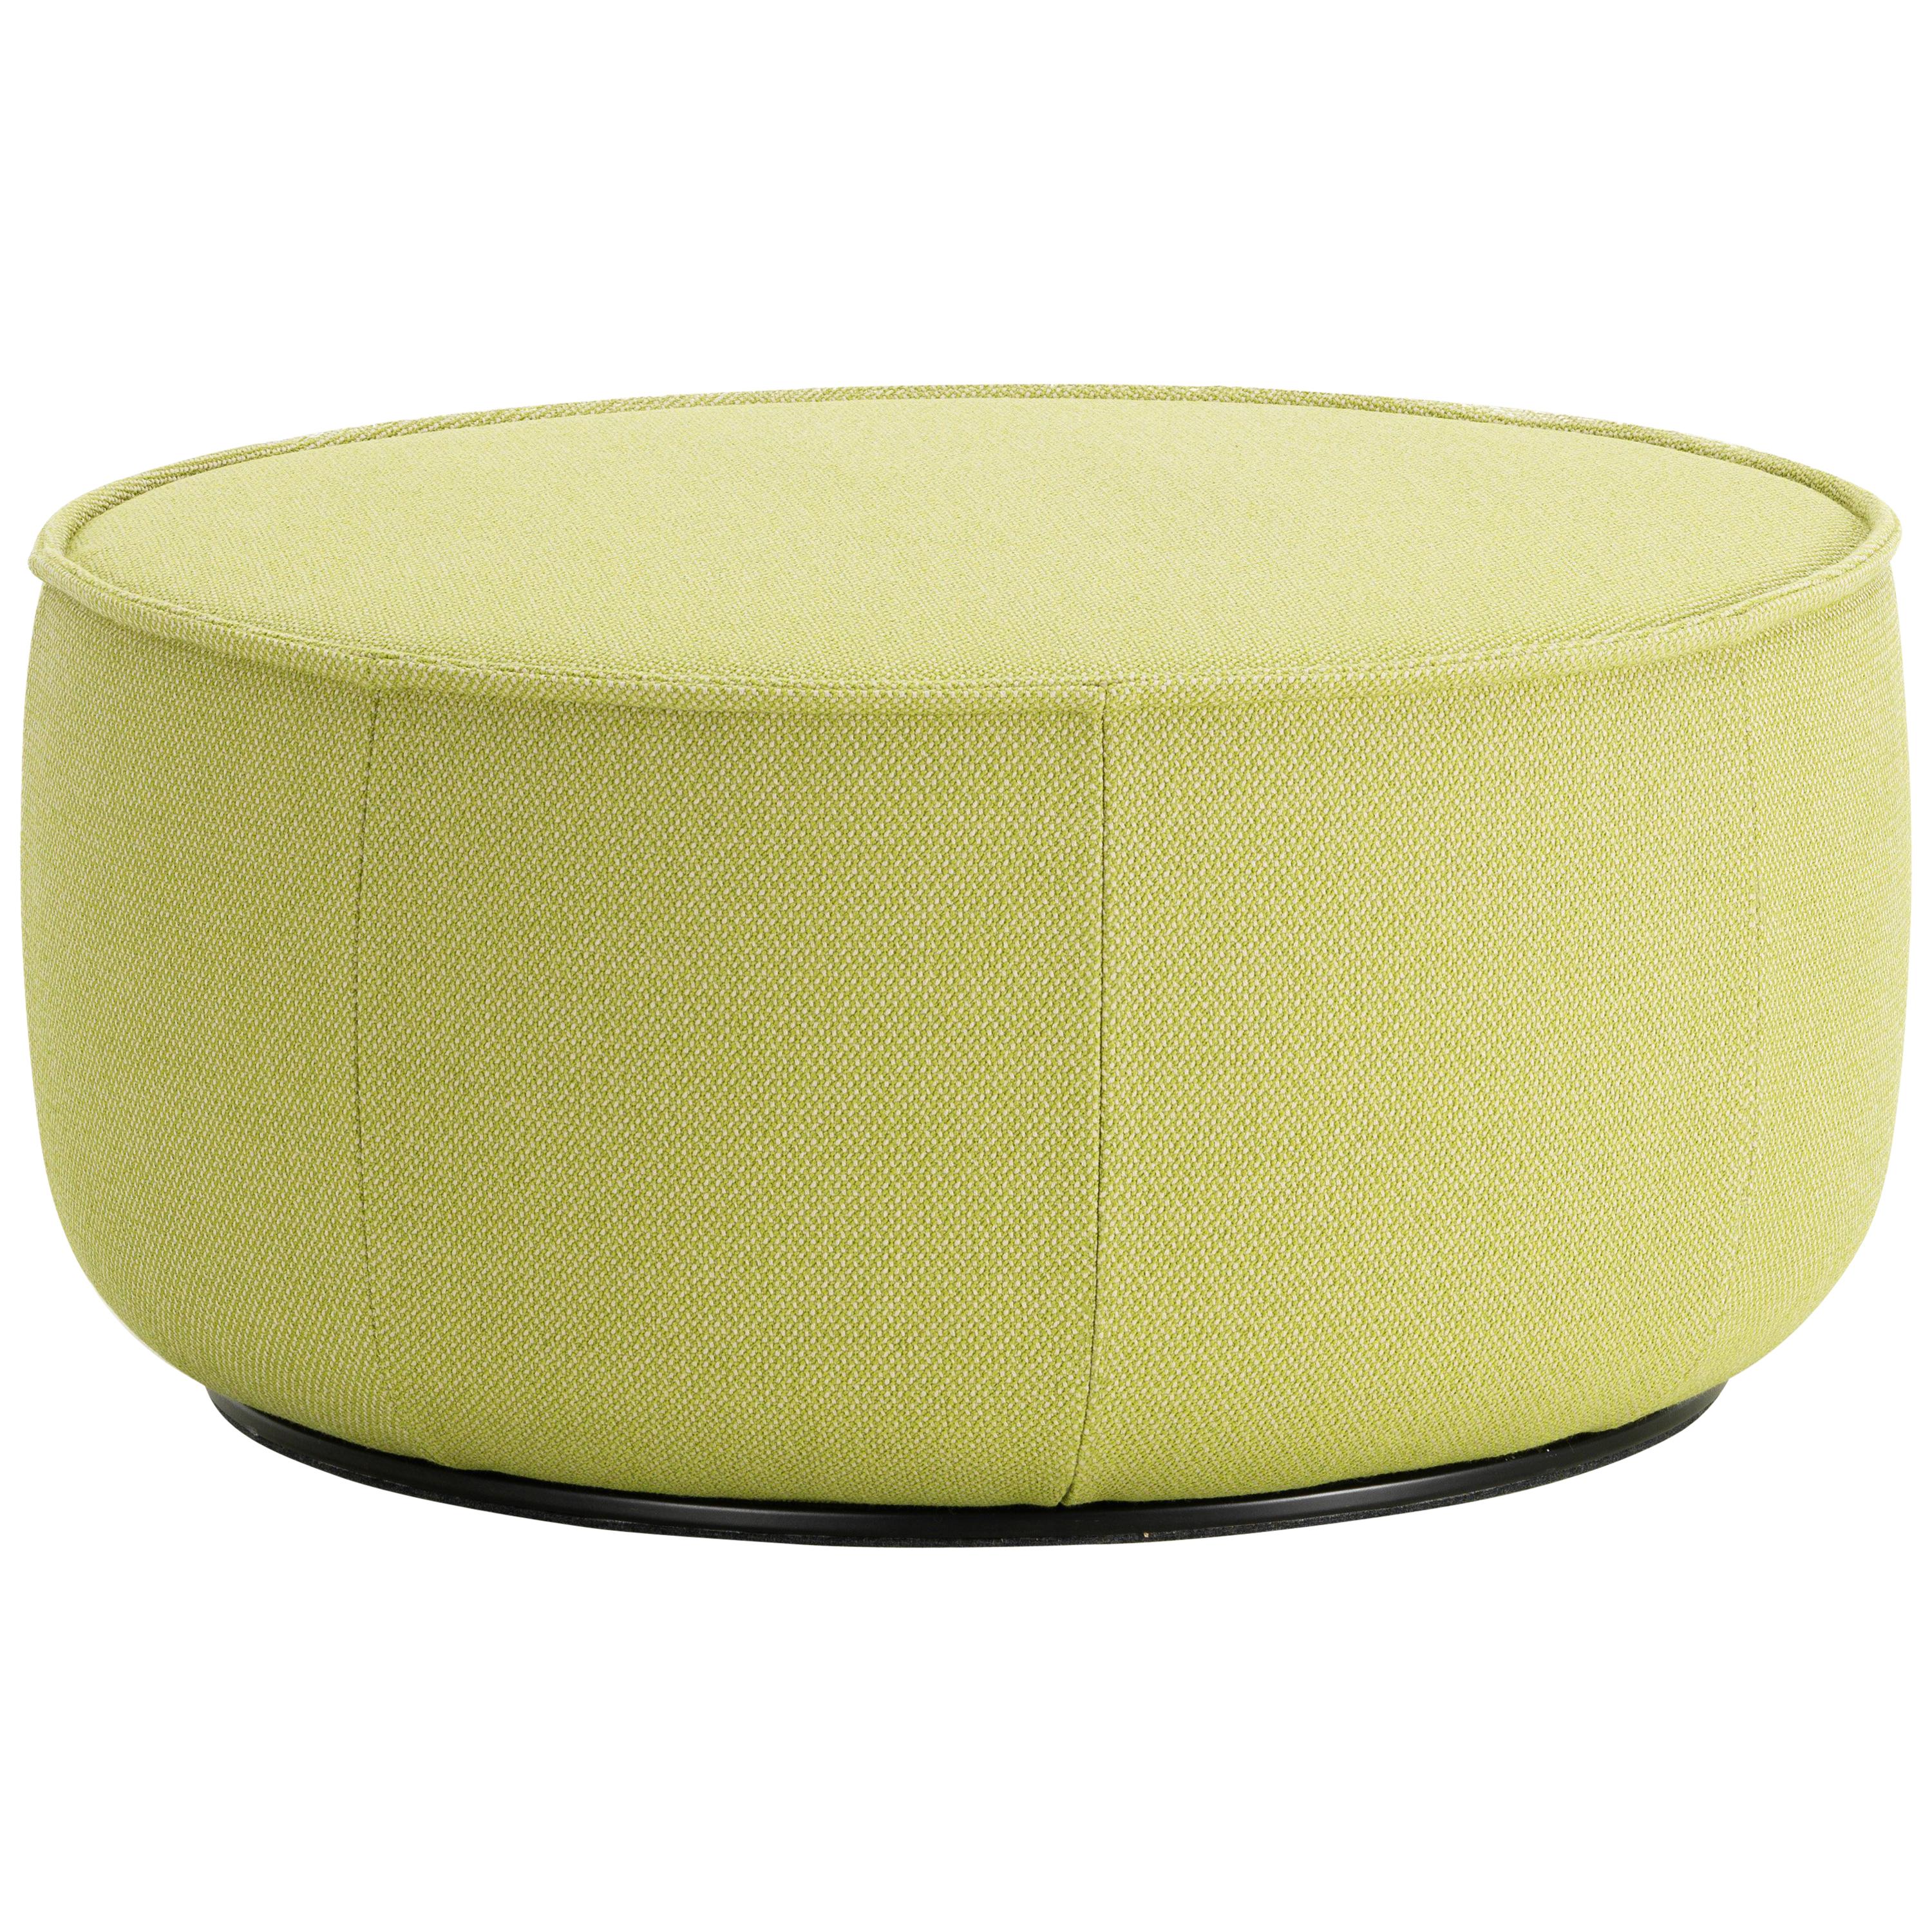 Vitra Mariposa Large Ottoman in Lemon Volo by Edward Barber & Jay Osgerby For Sale